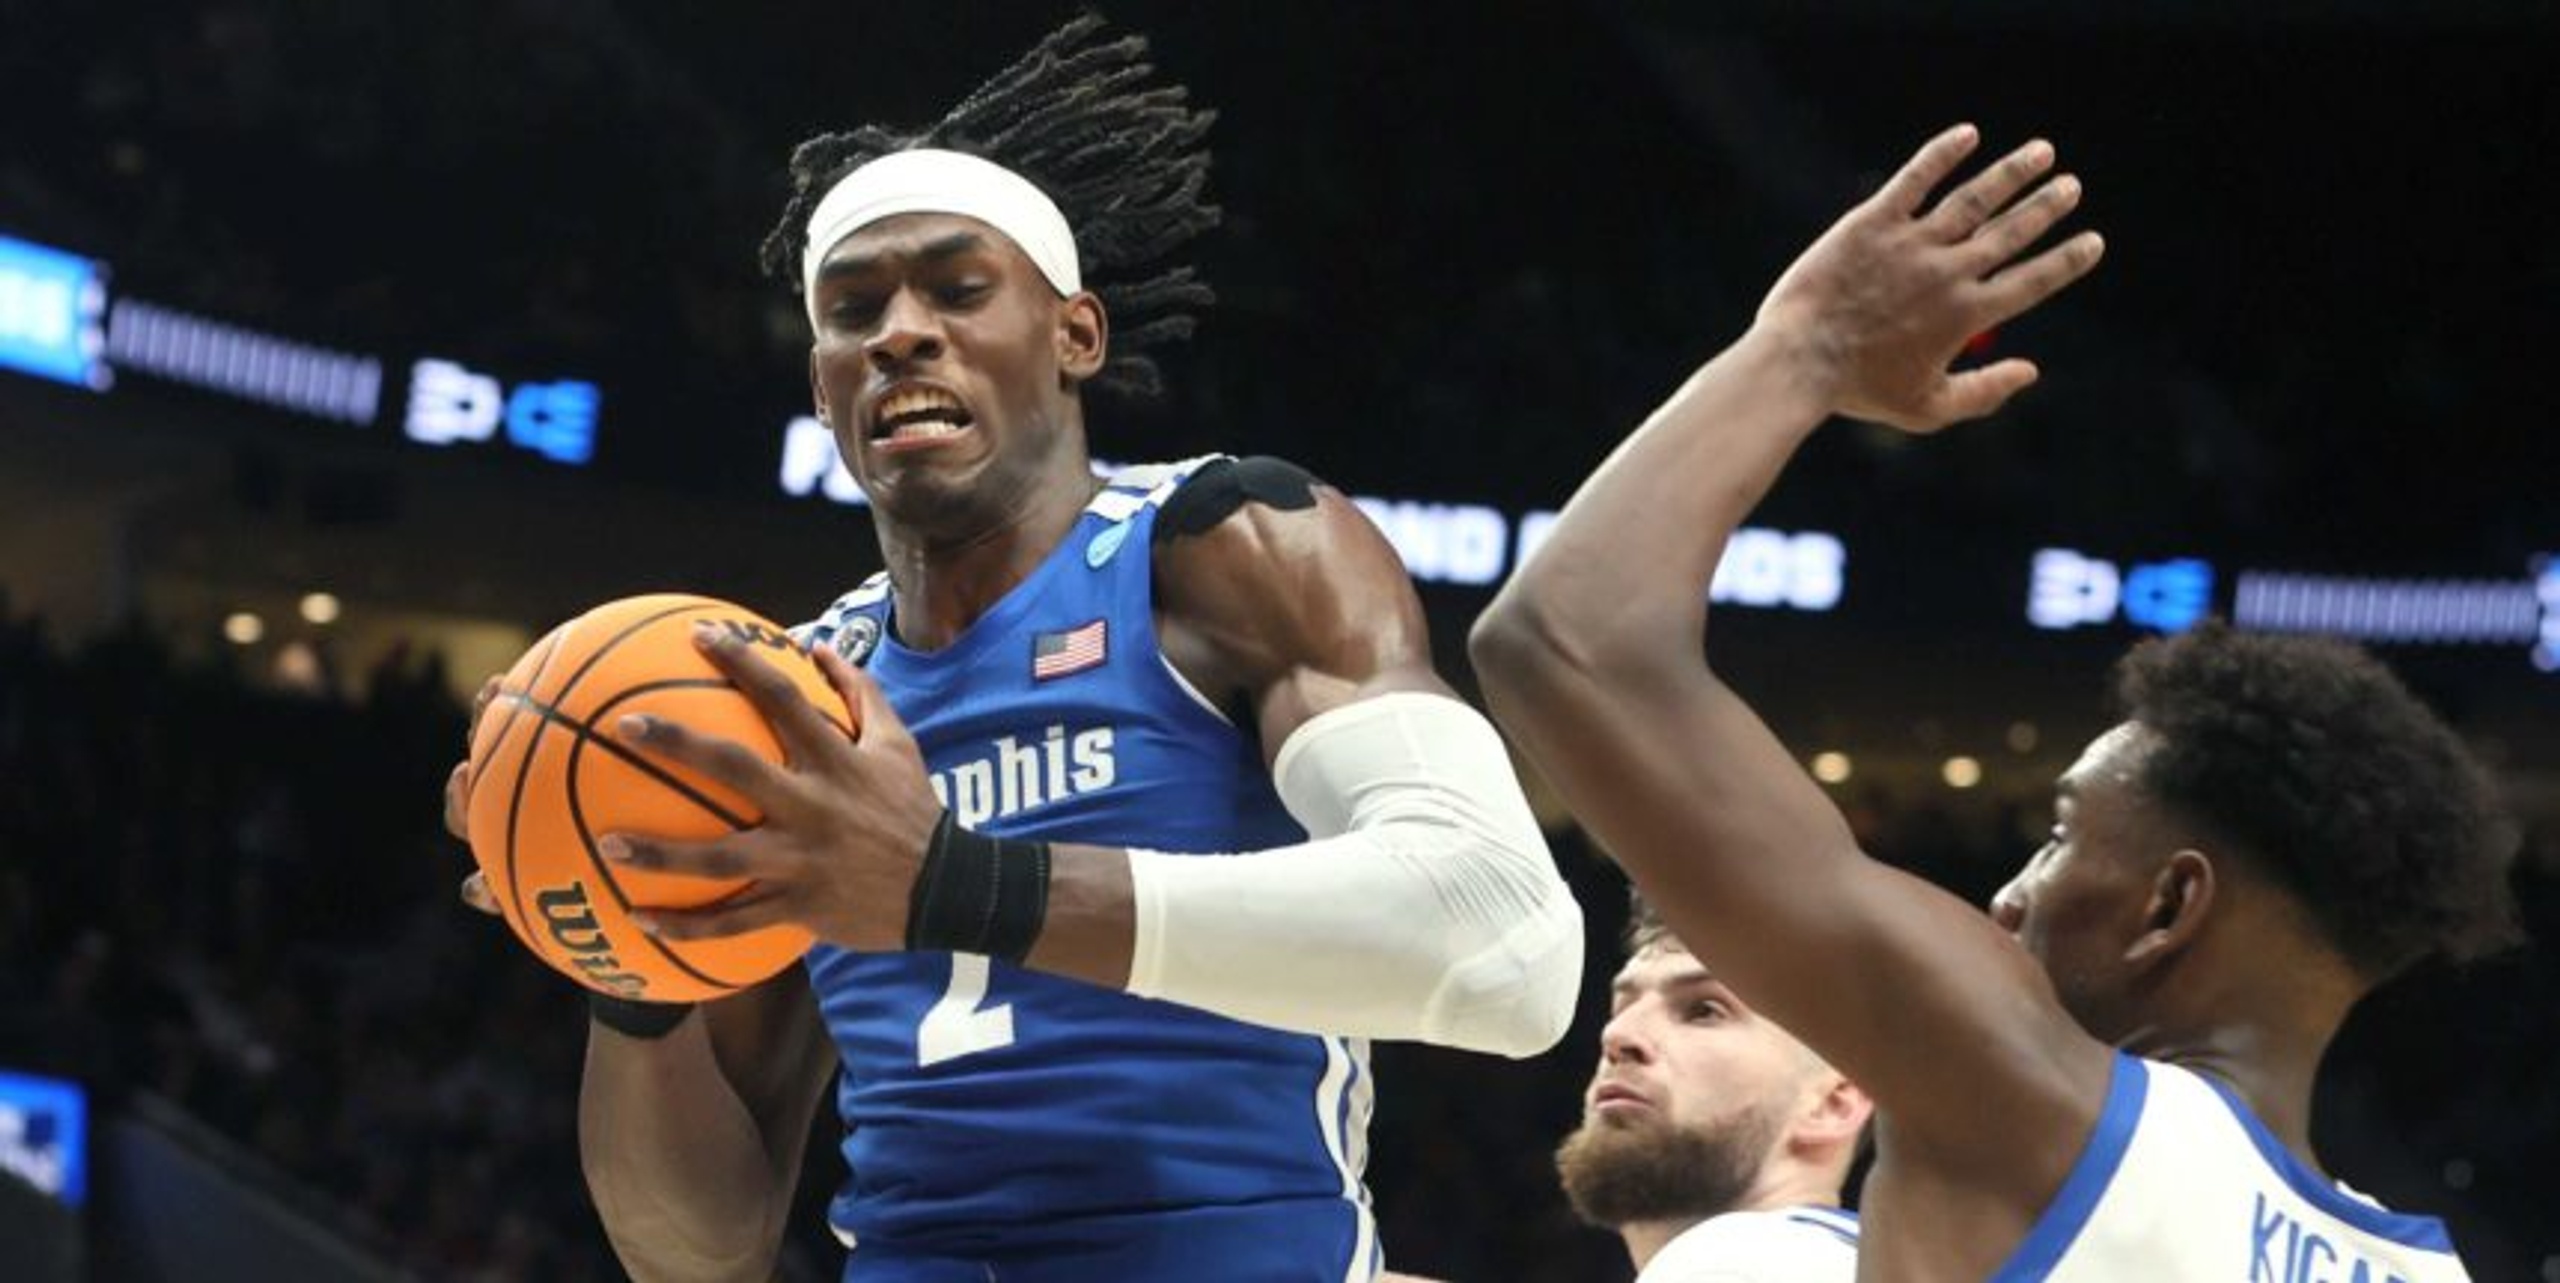 March Madness: Recapping Day 1 of the 2022 NCAA Tournament